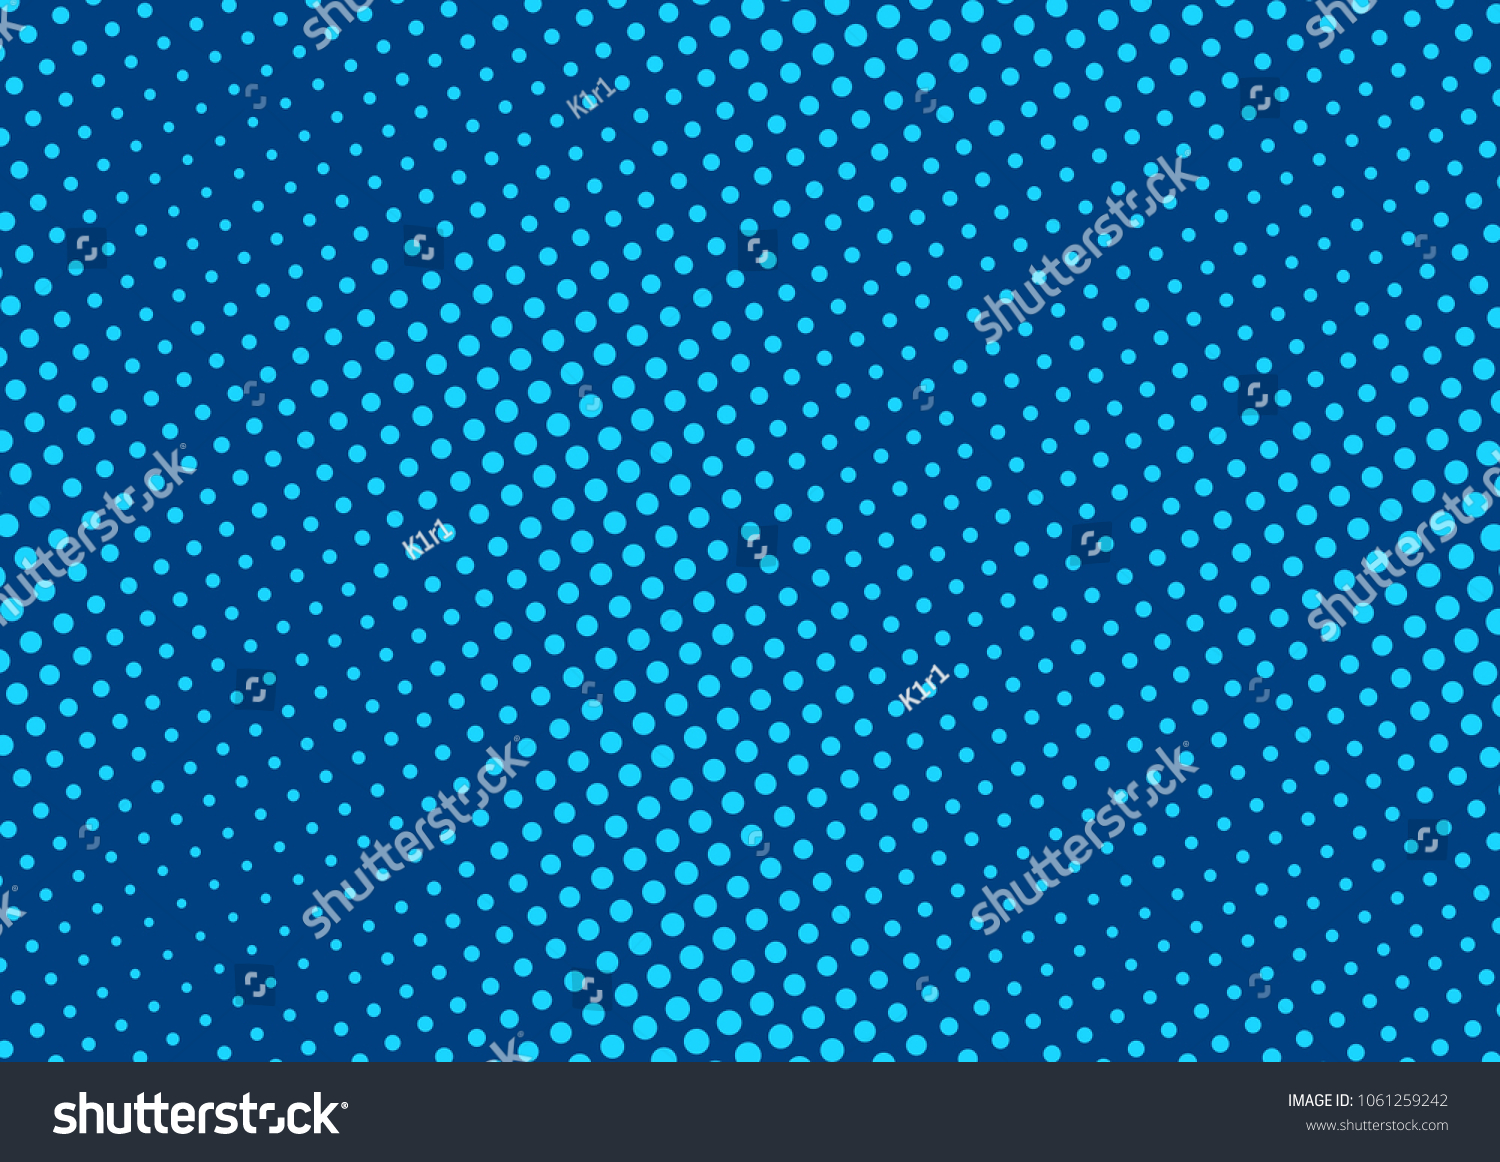 Blue Comic Popart Halftone Background Vector Stock Vector Royalty Free Shutterstock